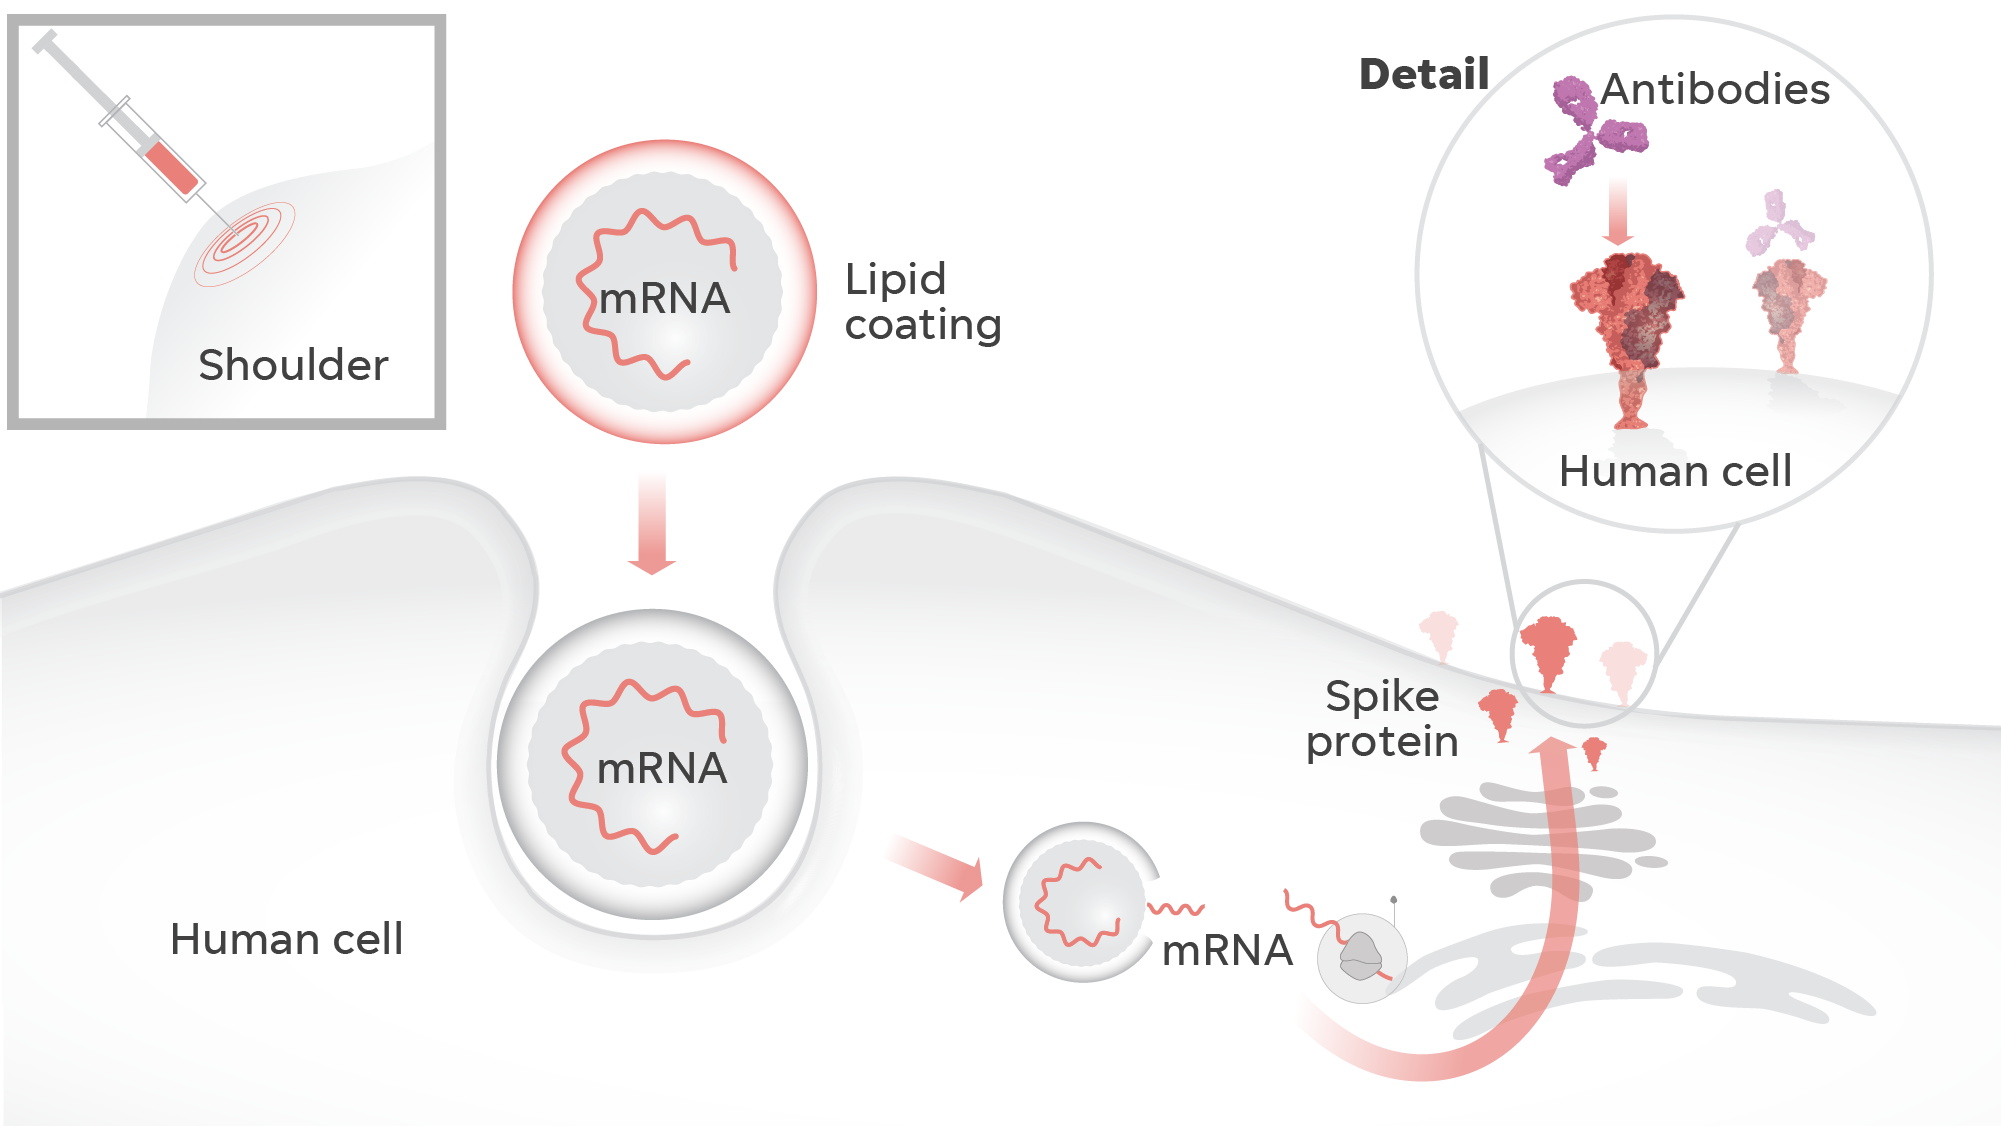 Moderna's COVID-19 vaccine relies on mRNA – messenger ribonucleic acid – to get our cells to produce a virus-free spike protein. The vaccine delivers mRNA into the body’s cells in a lipid coating, like a fat bubble. Once inside, the cell produces spike proteins similar to those on the surface of SARS-CoV-2. Our immune system recognizes those vaccine-created spike proteins as invaders and creates antibodies to block future attacks.